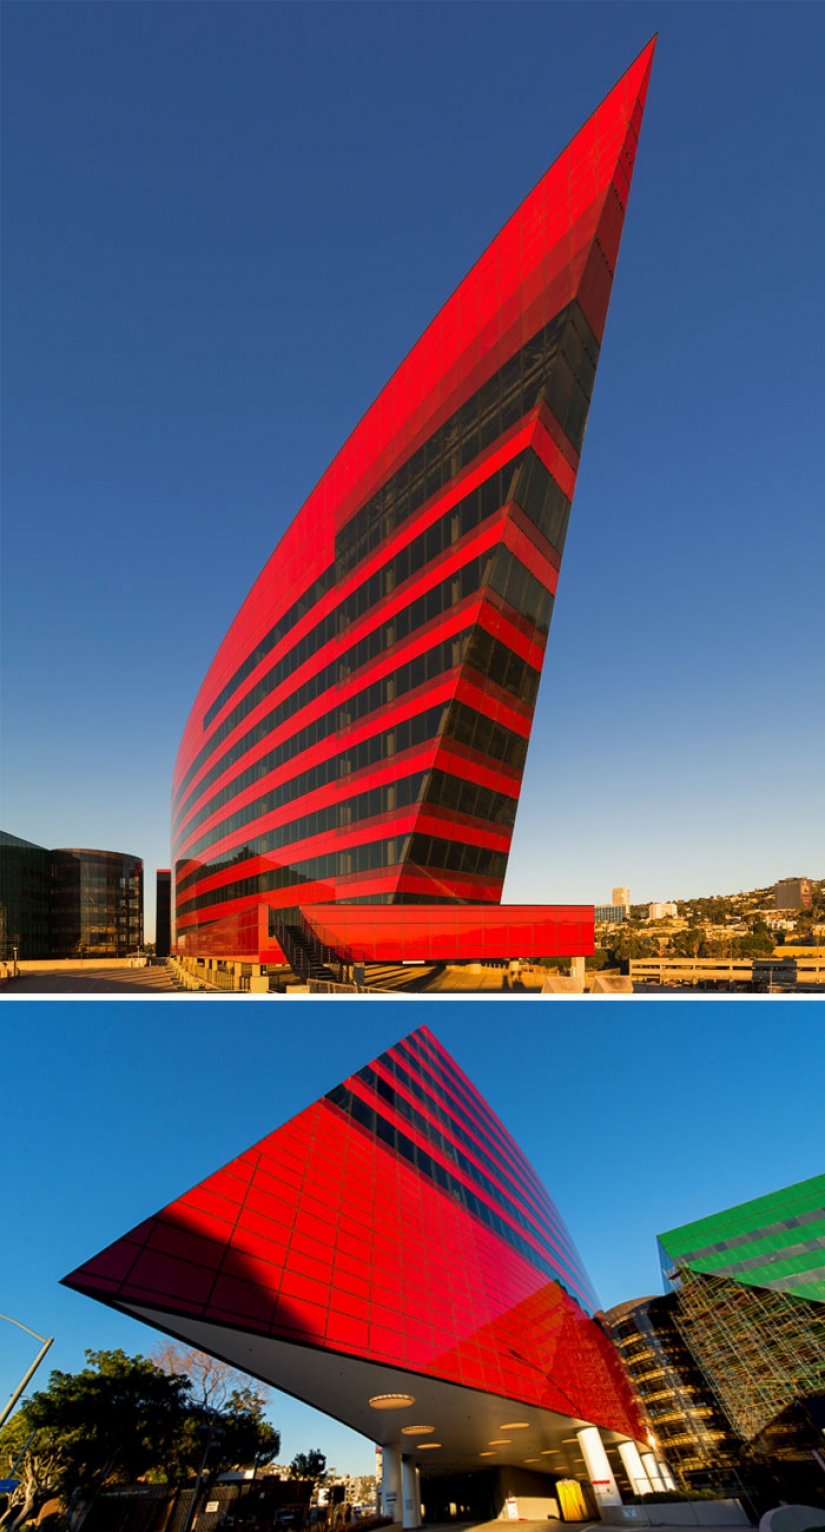 22 buildings that could easily pass for the headquarters of supervillains